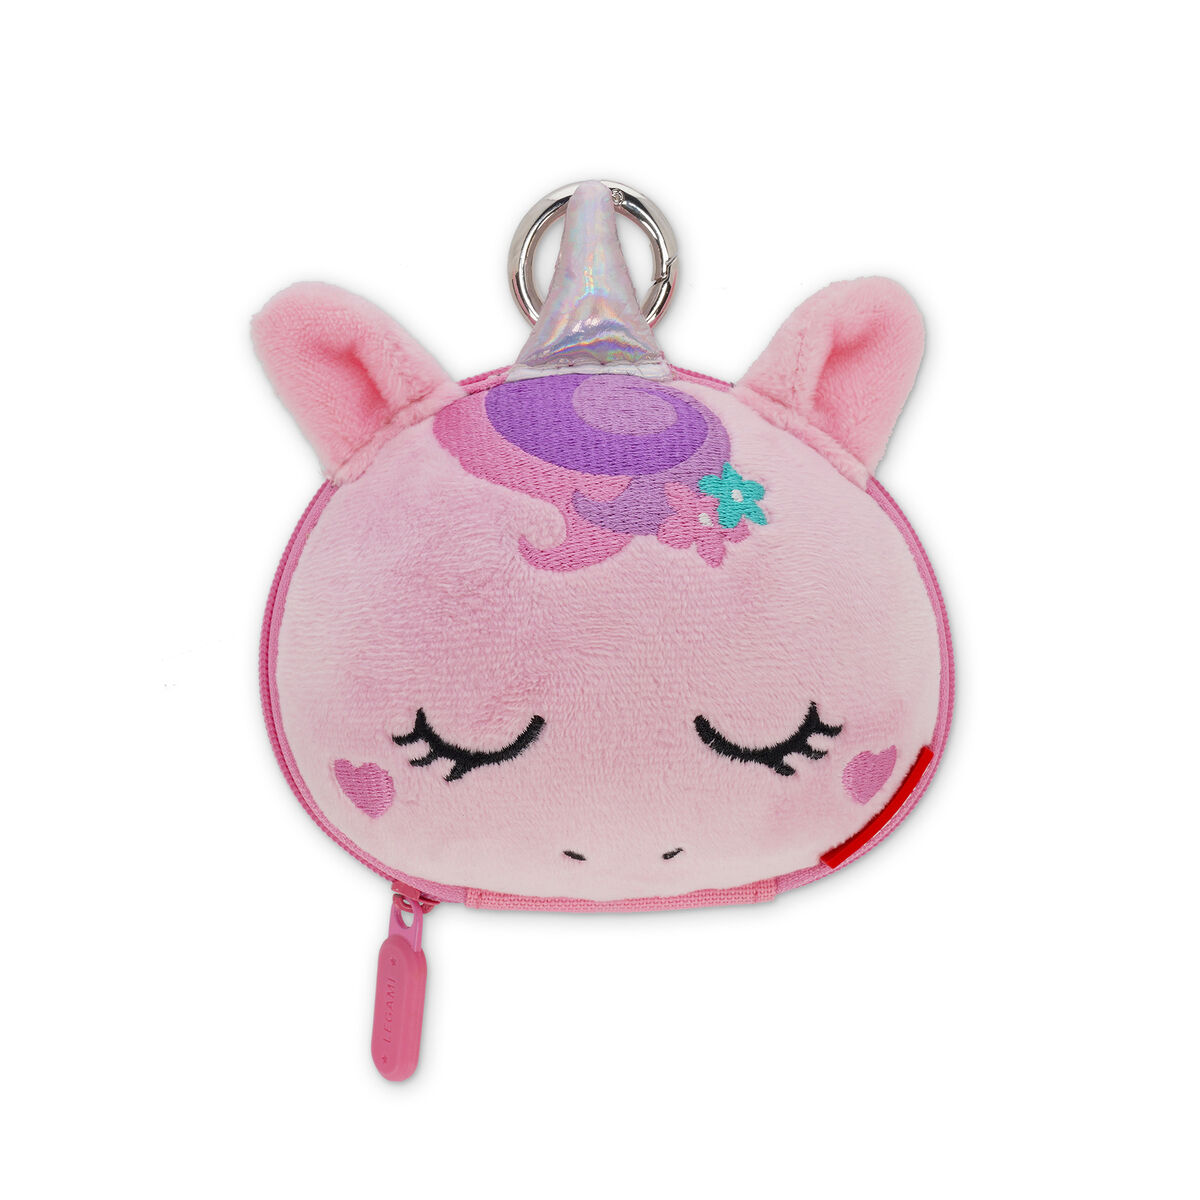 Coin Purse with Key Ring - So Cute!, , zoo